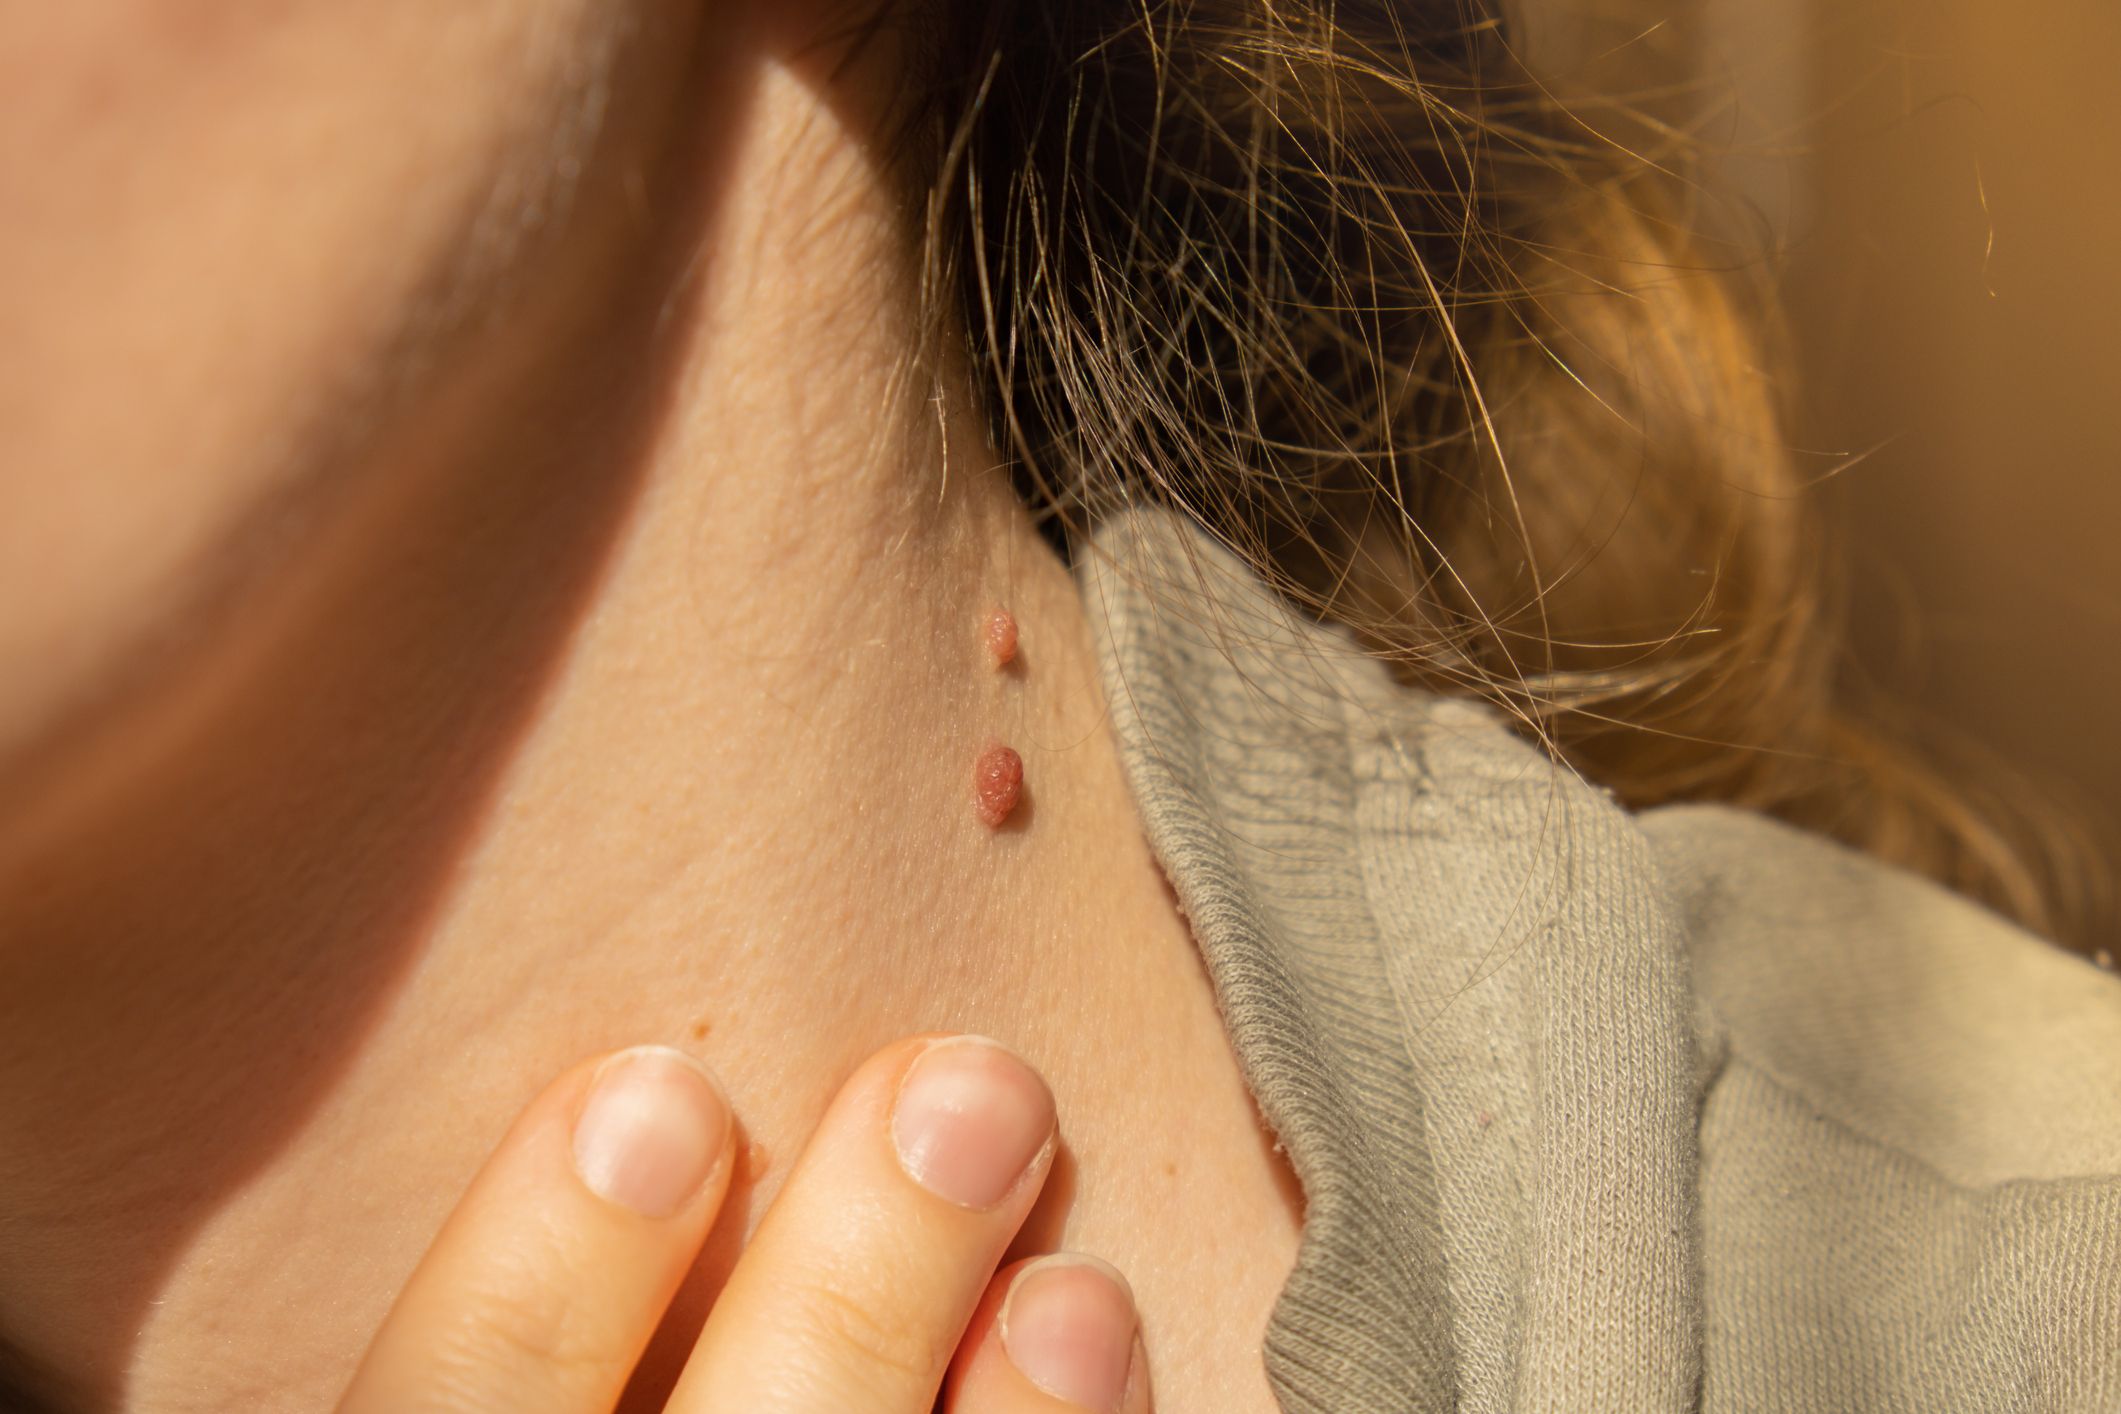 Skin Tag Removal–How to Safely Remove Skin Tags